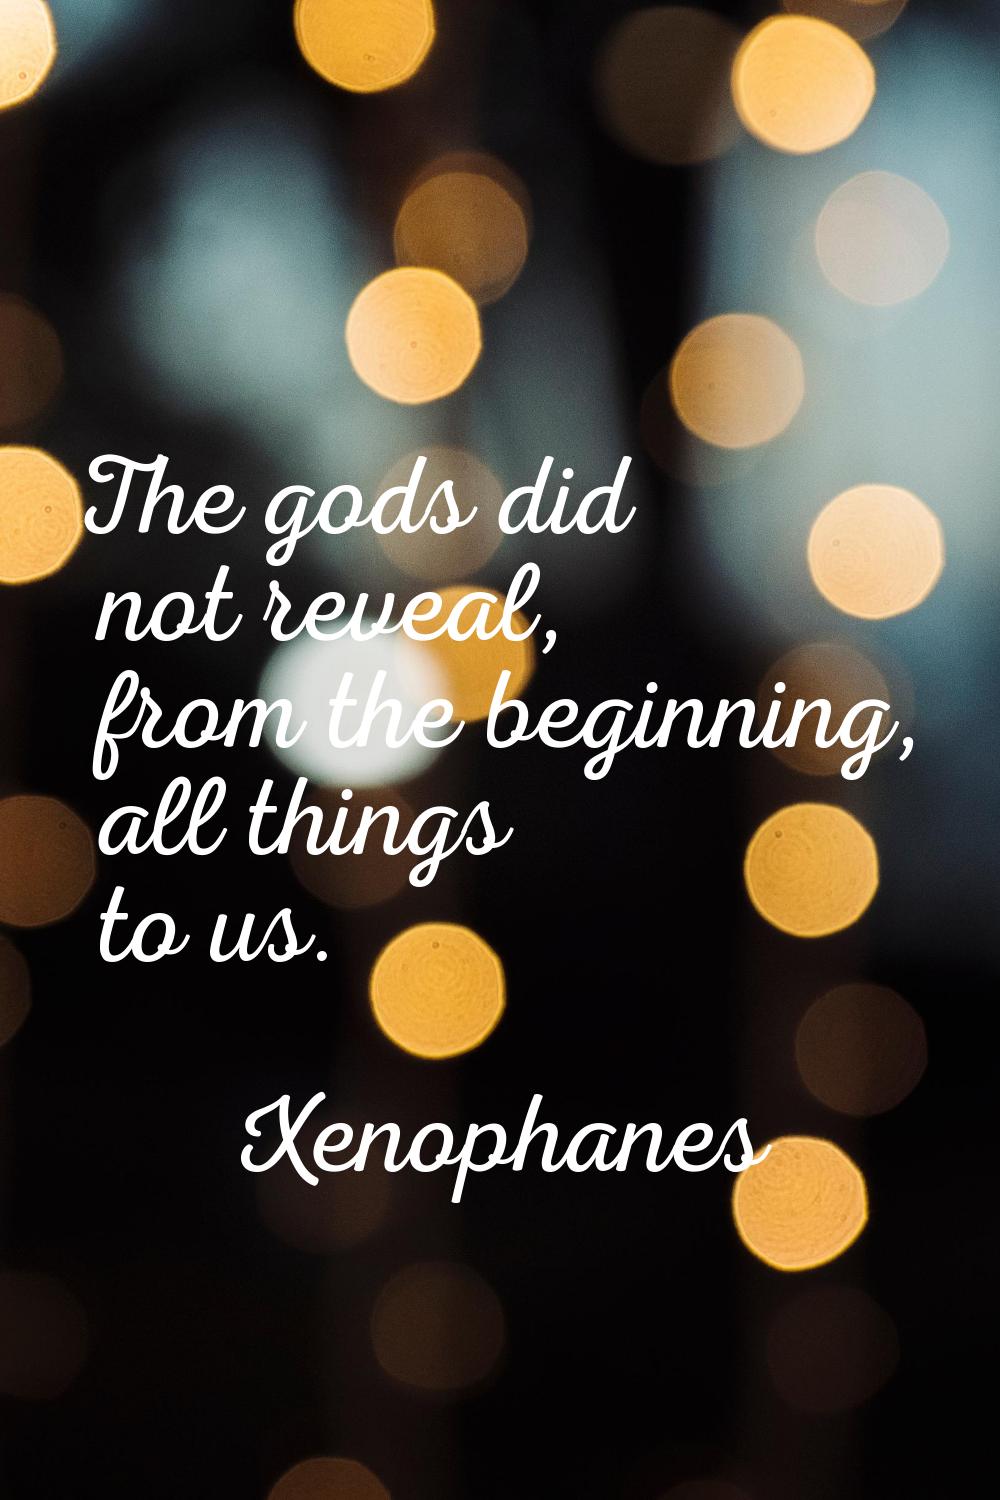 The gods did not reveal, from the beginning, all things to us.